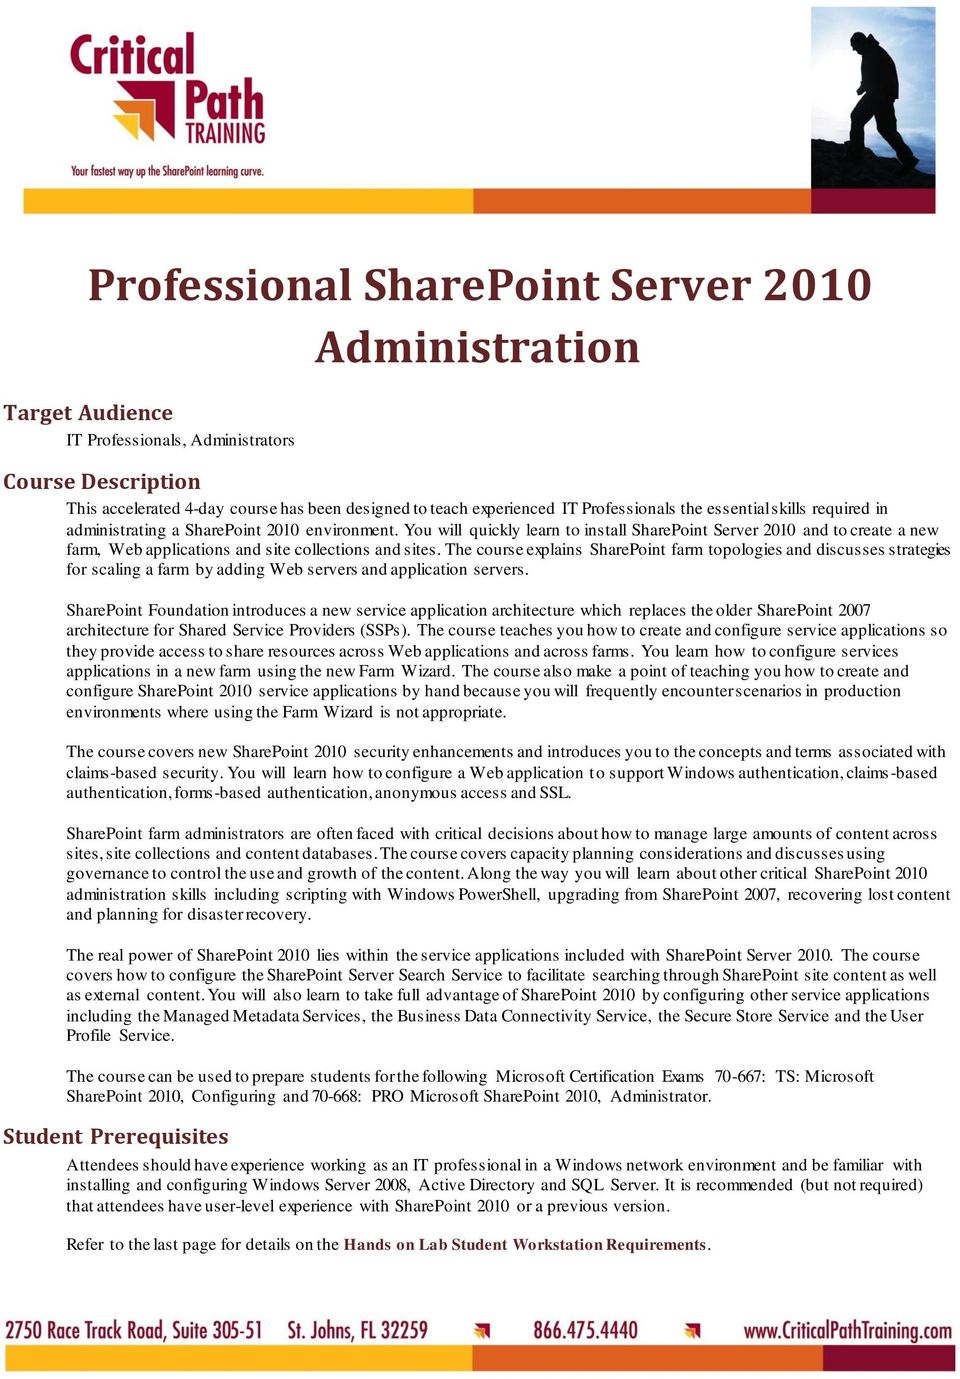 Professional Sharepoint Server 2010 Administration Pdf Free Download